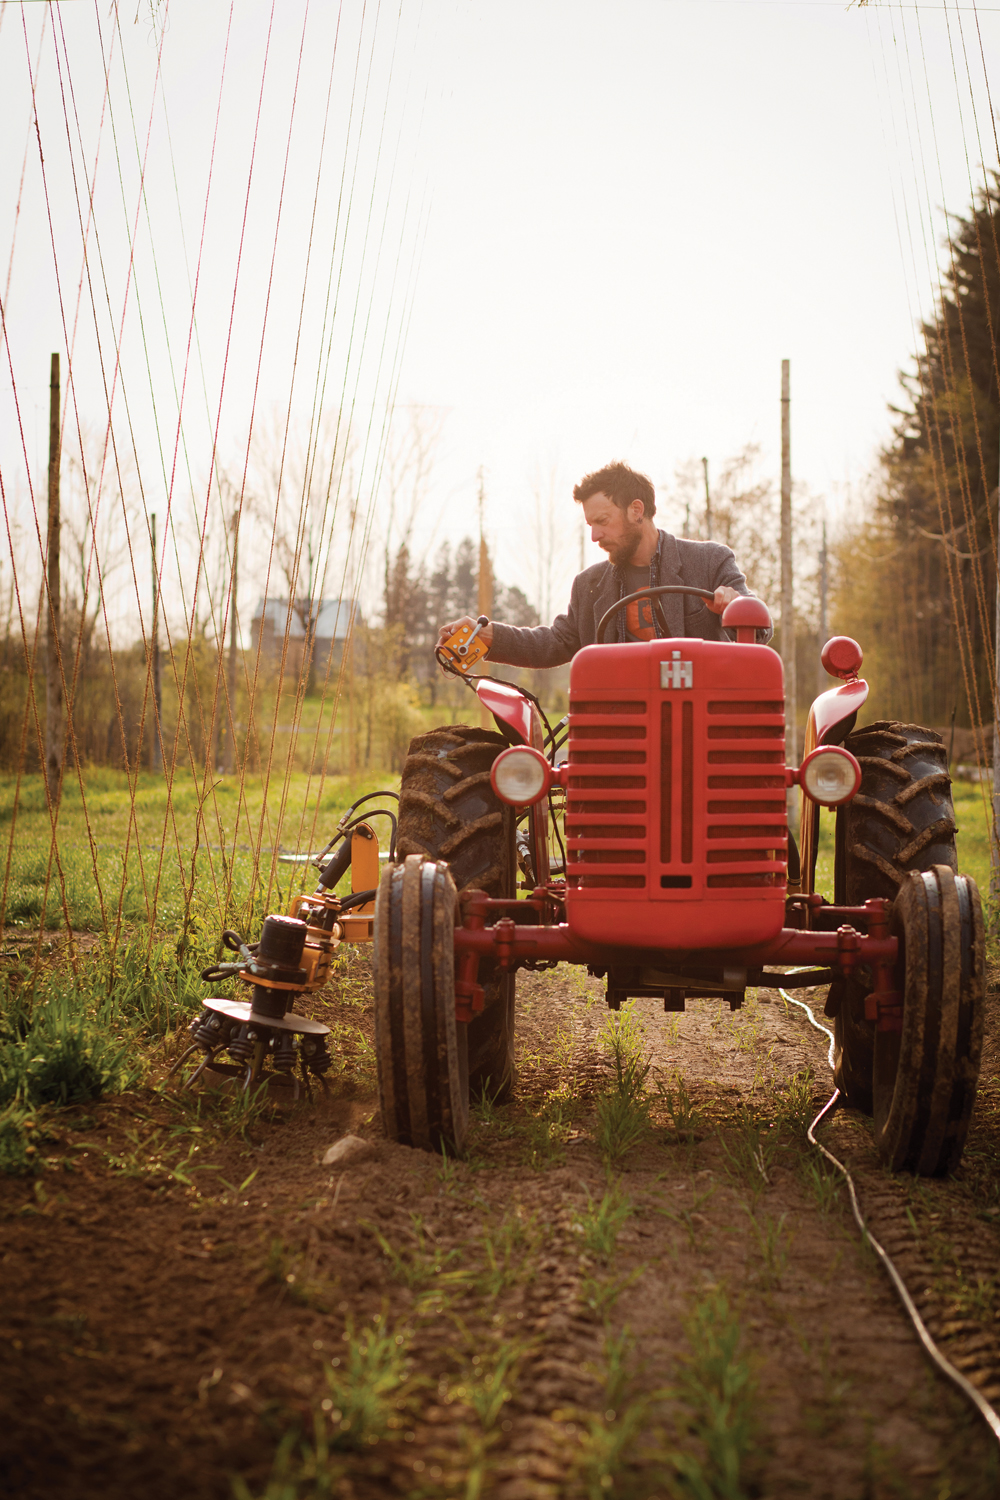 Nicholas Schaut, owner of Bighead Hops in Meaford, uses his “weed badger” to care for his crops. Schaut adopts a “gentleman farmer’s” uniform of tweed jacket and Wellington boots inspired by George Harrison.